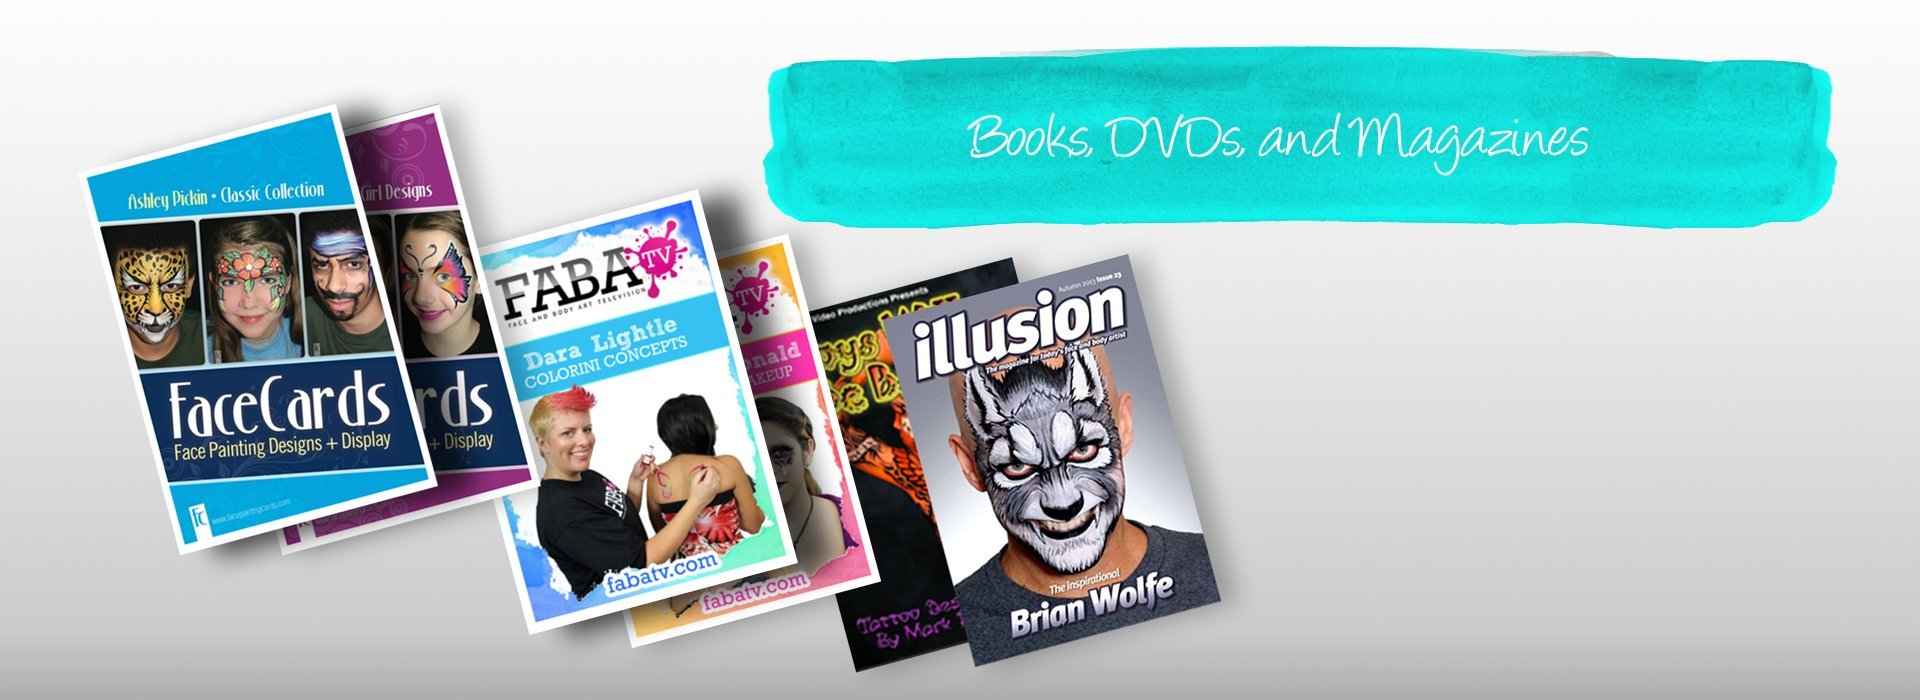 Books, DVDs, and Magazines | Silly Farm Supplies